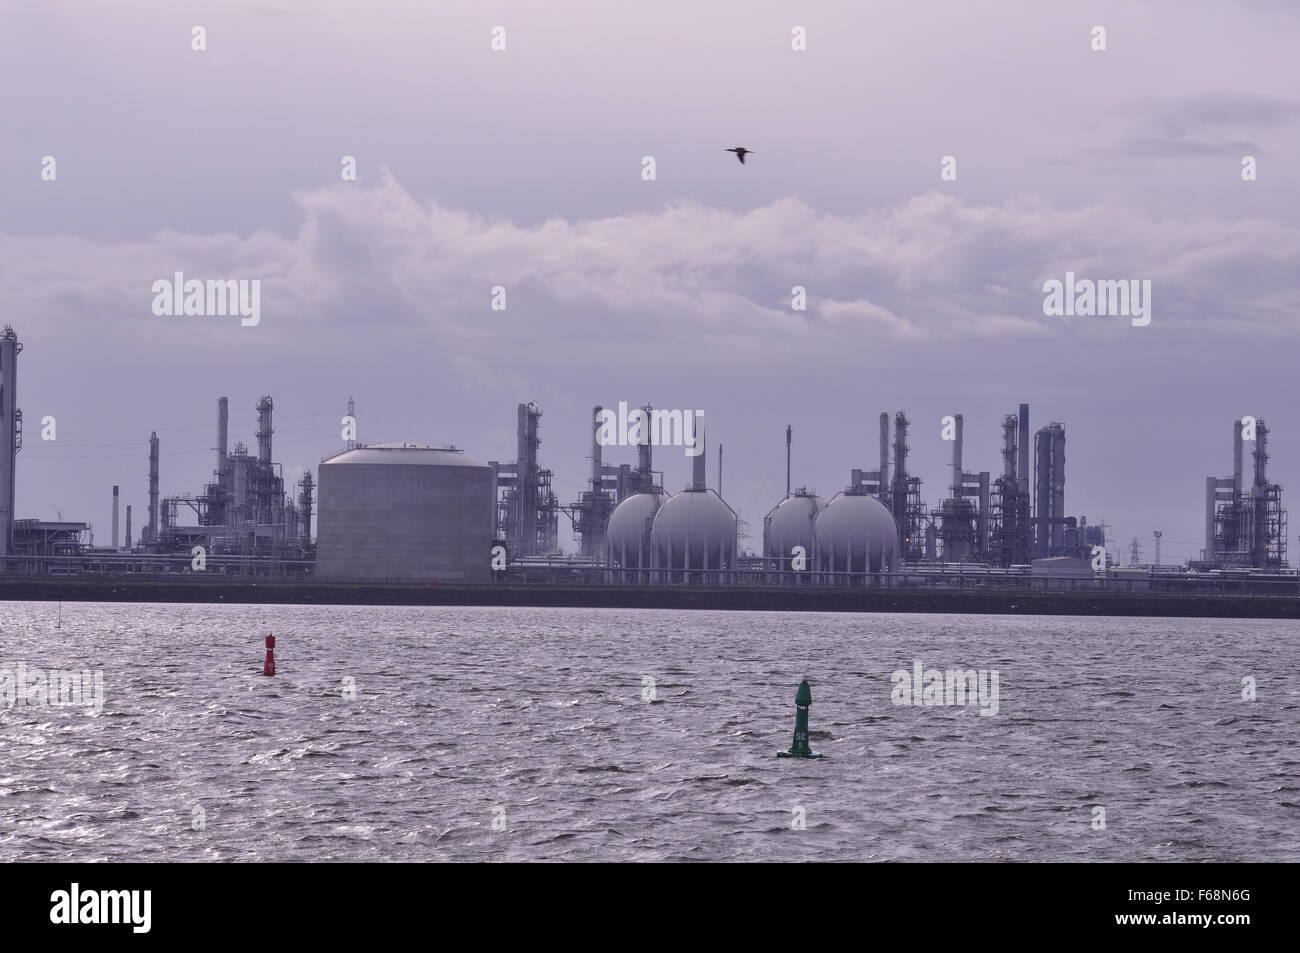 industry Teesport Tees Mouth industry fossil fuels fuel tank tanks reflection River river Cleveland UK Stock Photo